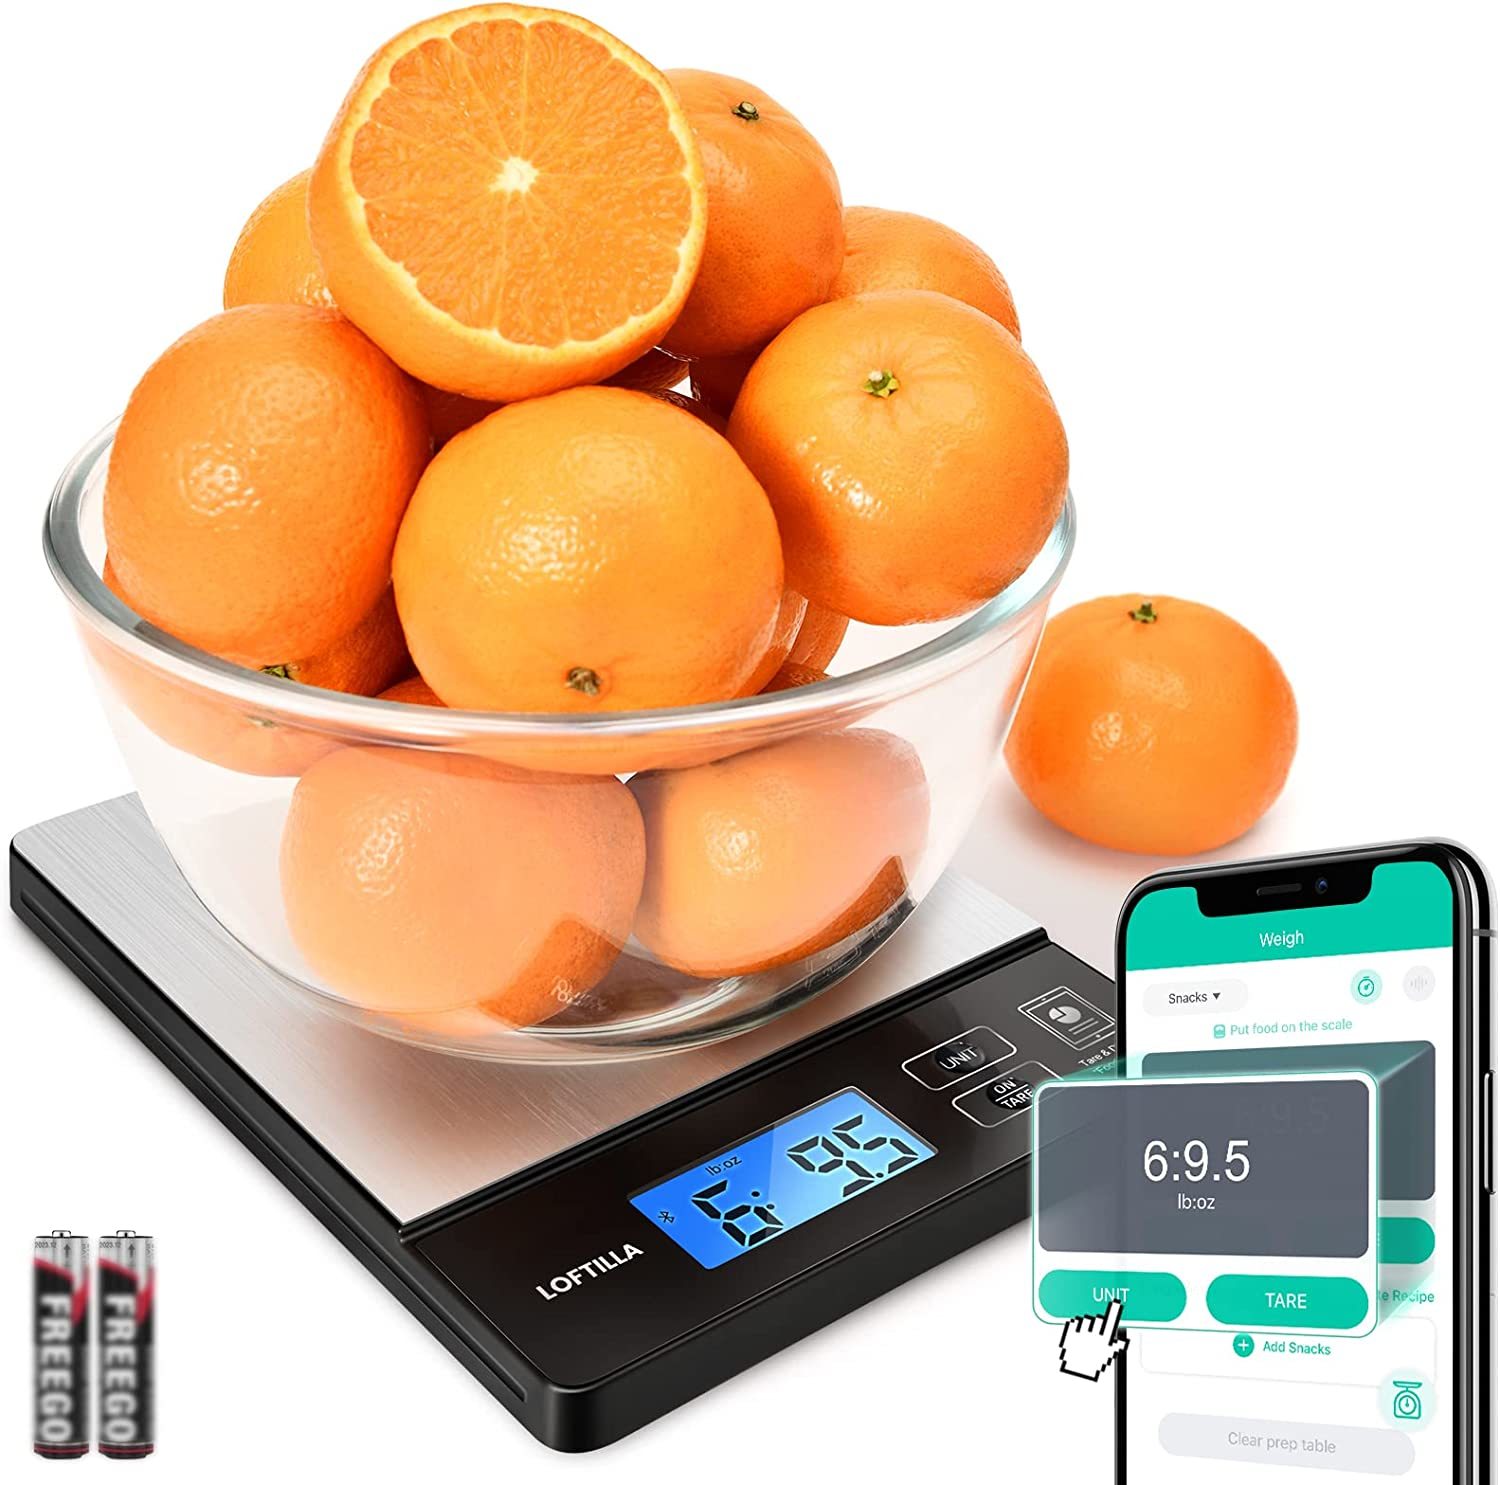 Loftilla Digital Food Scale For Weight Loss, Smart Kitchen Gift Scale, 11Lb/5Kg - $37.99